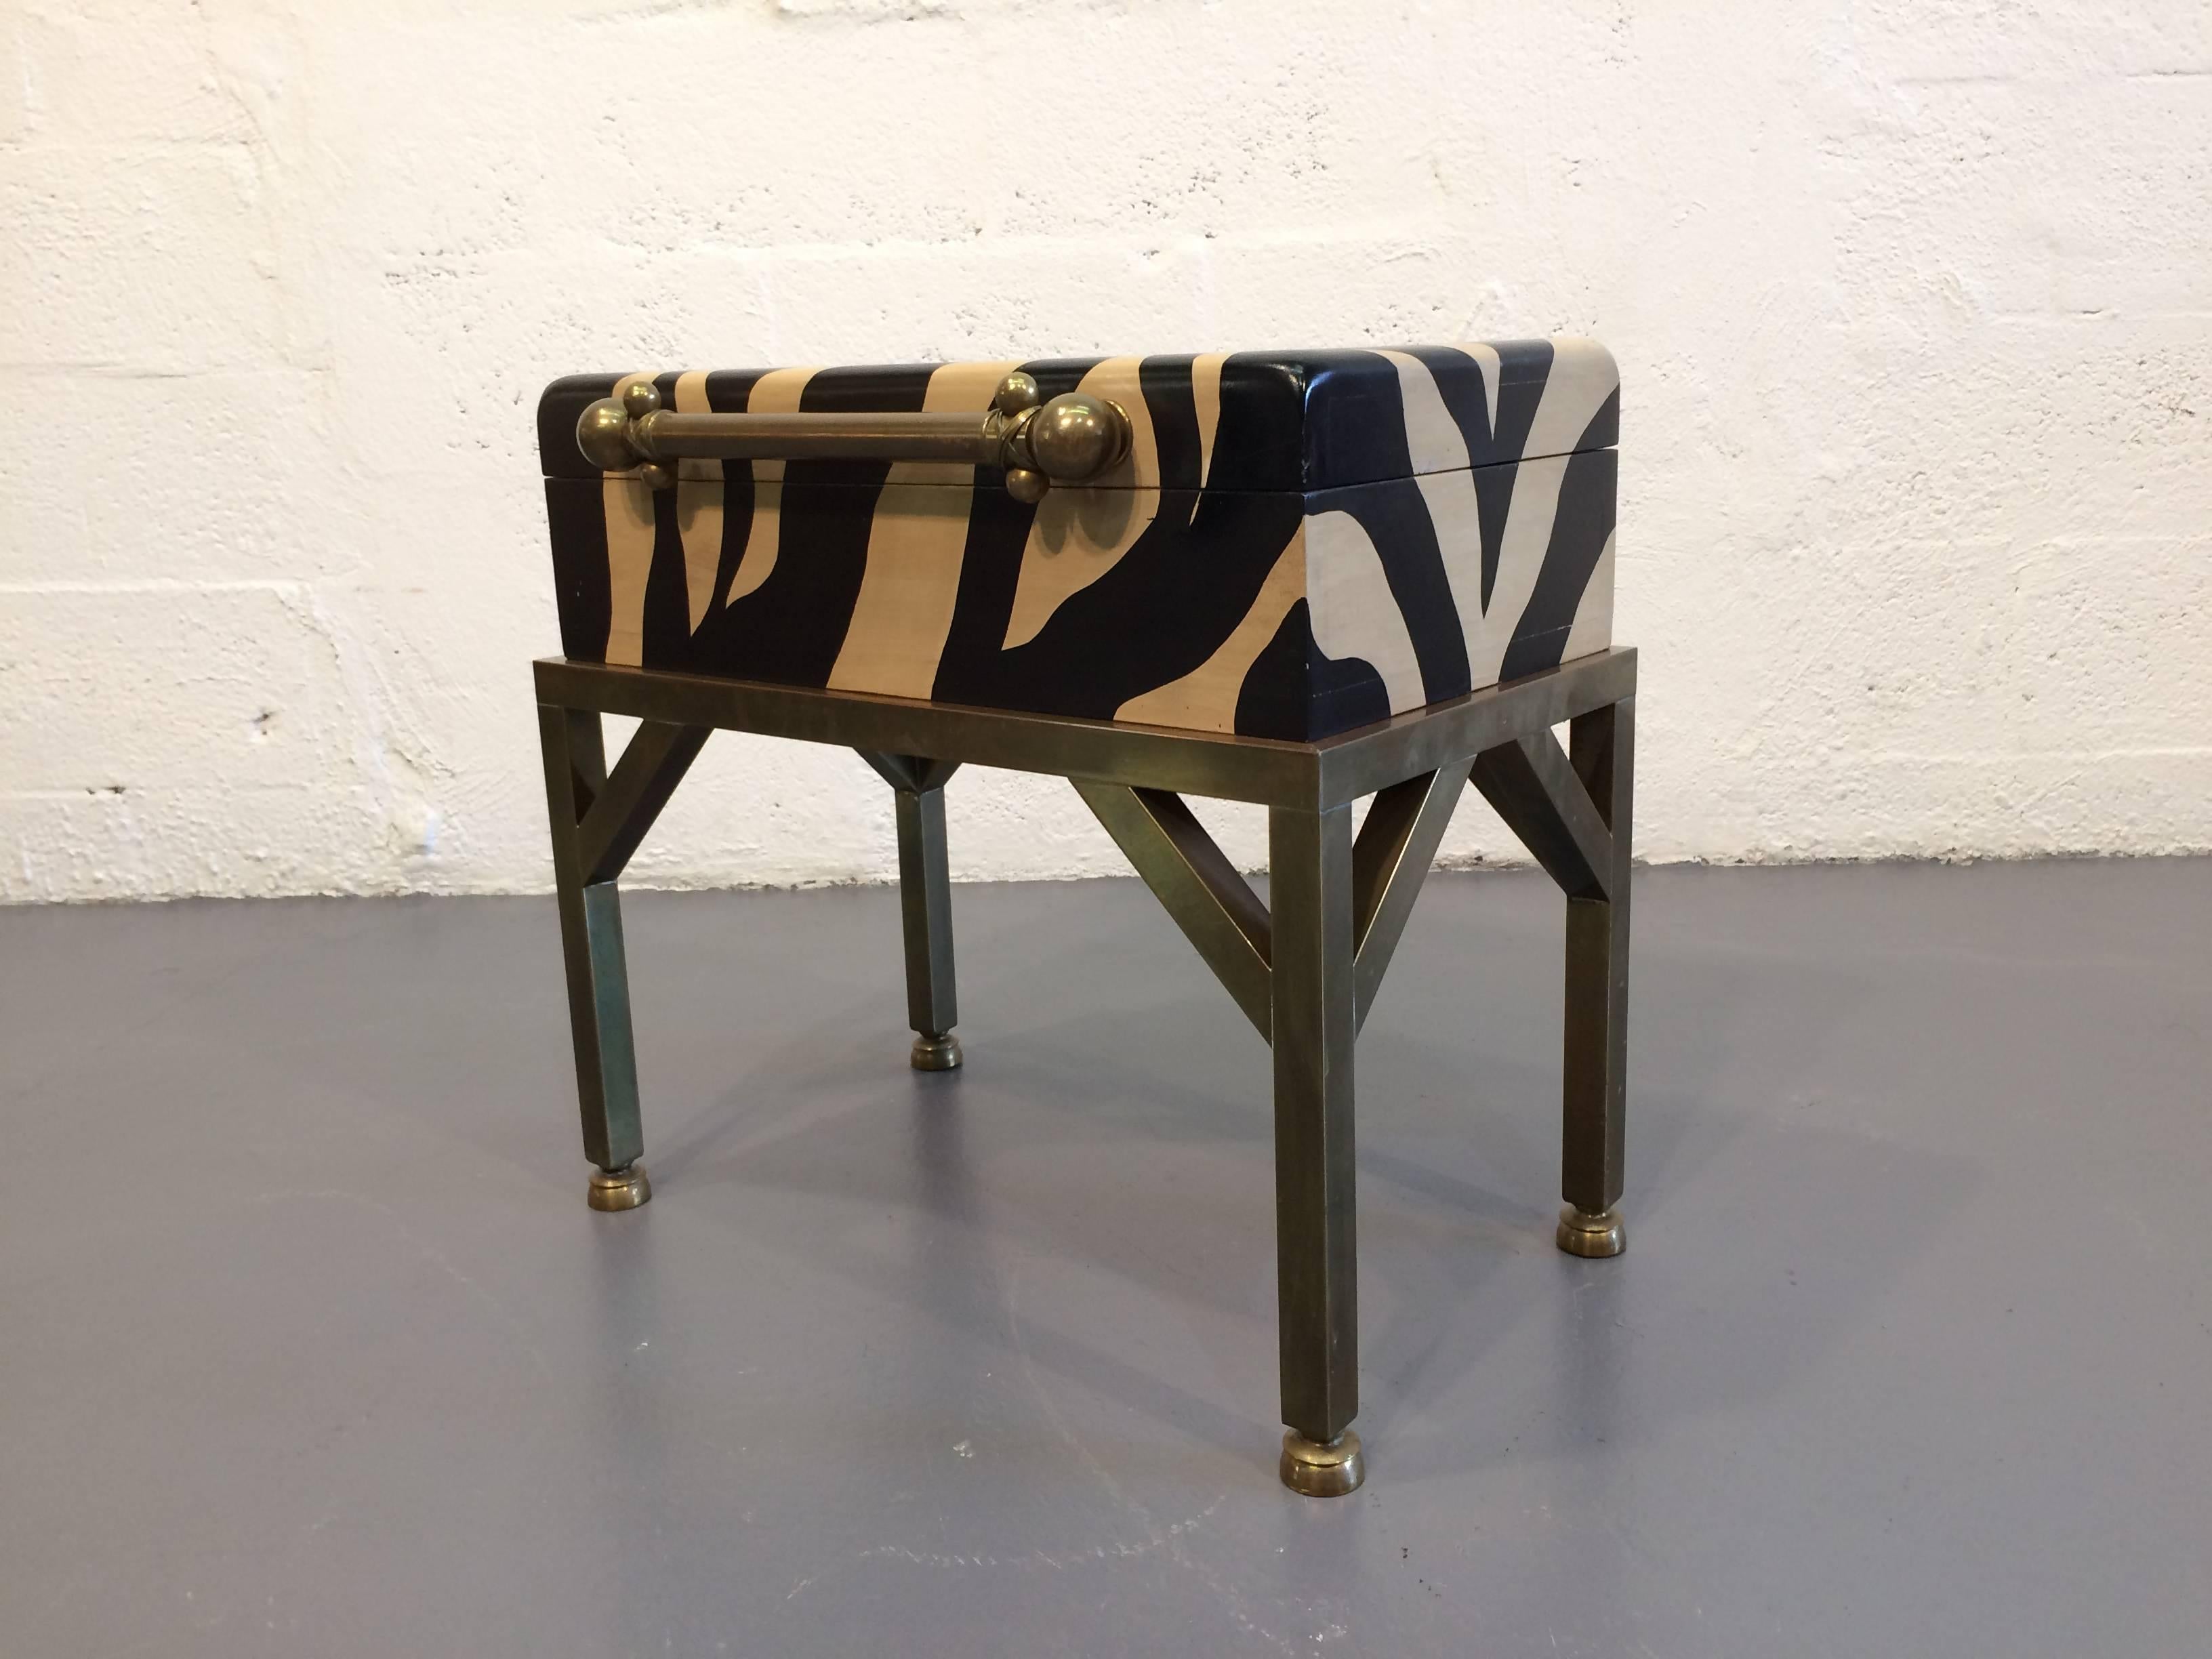 Trunk with a painted zebra pattern, hinged lid, brass handle and details.
Box can be removed from base.